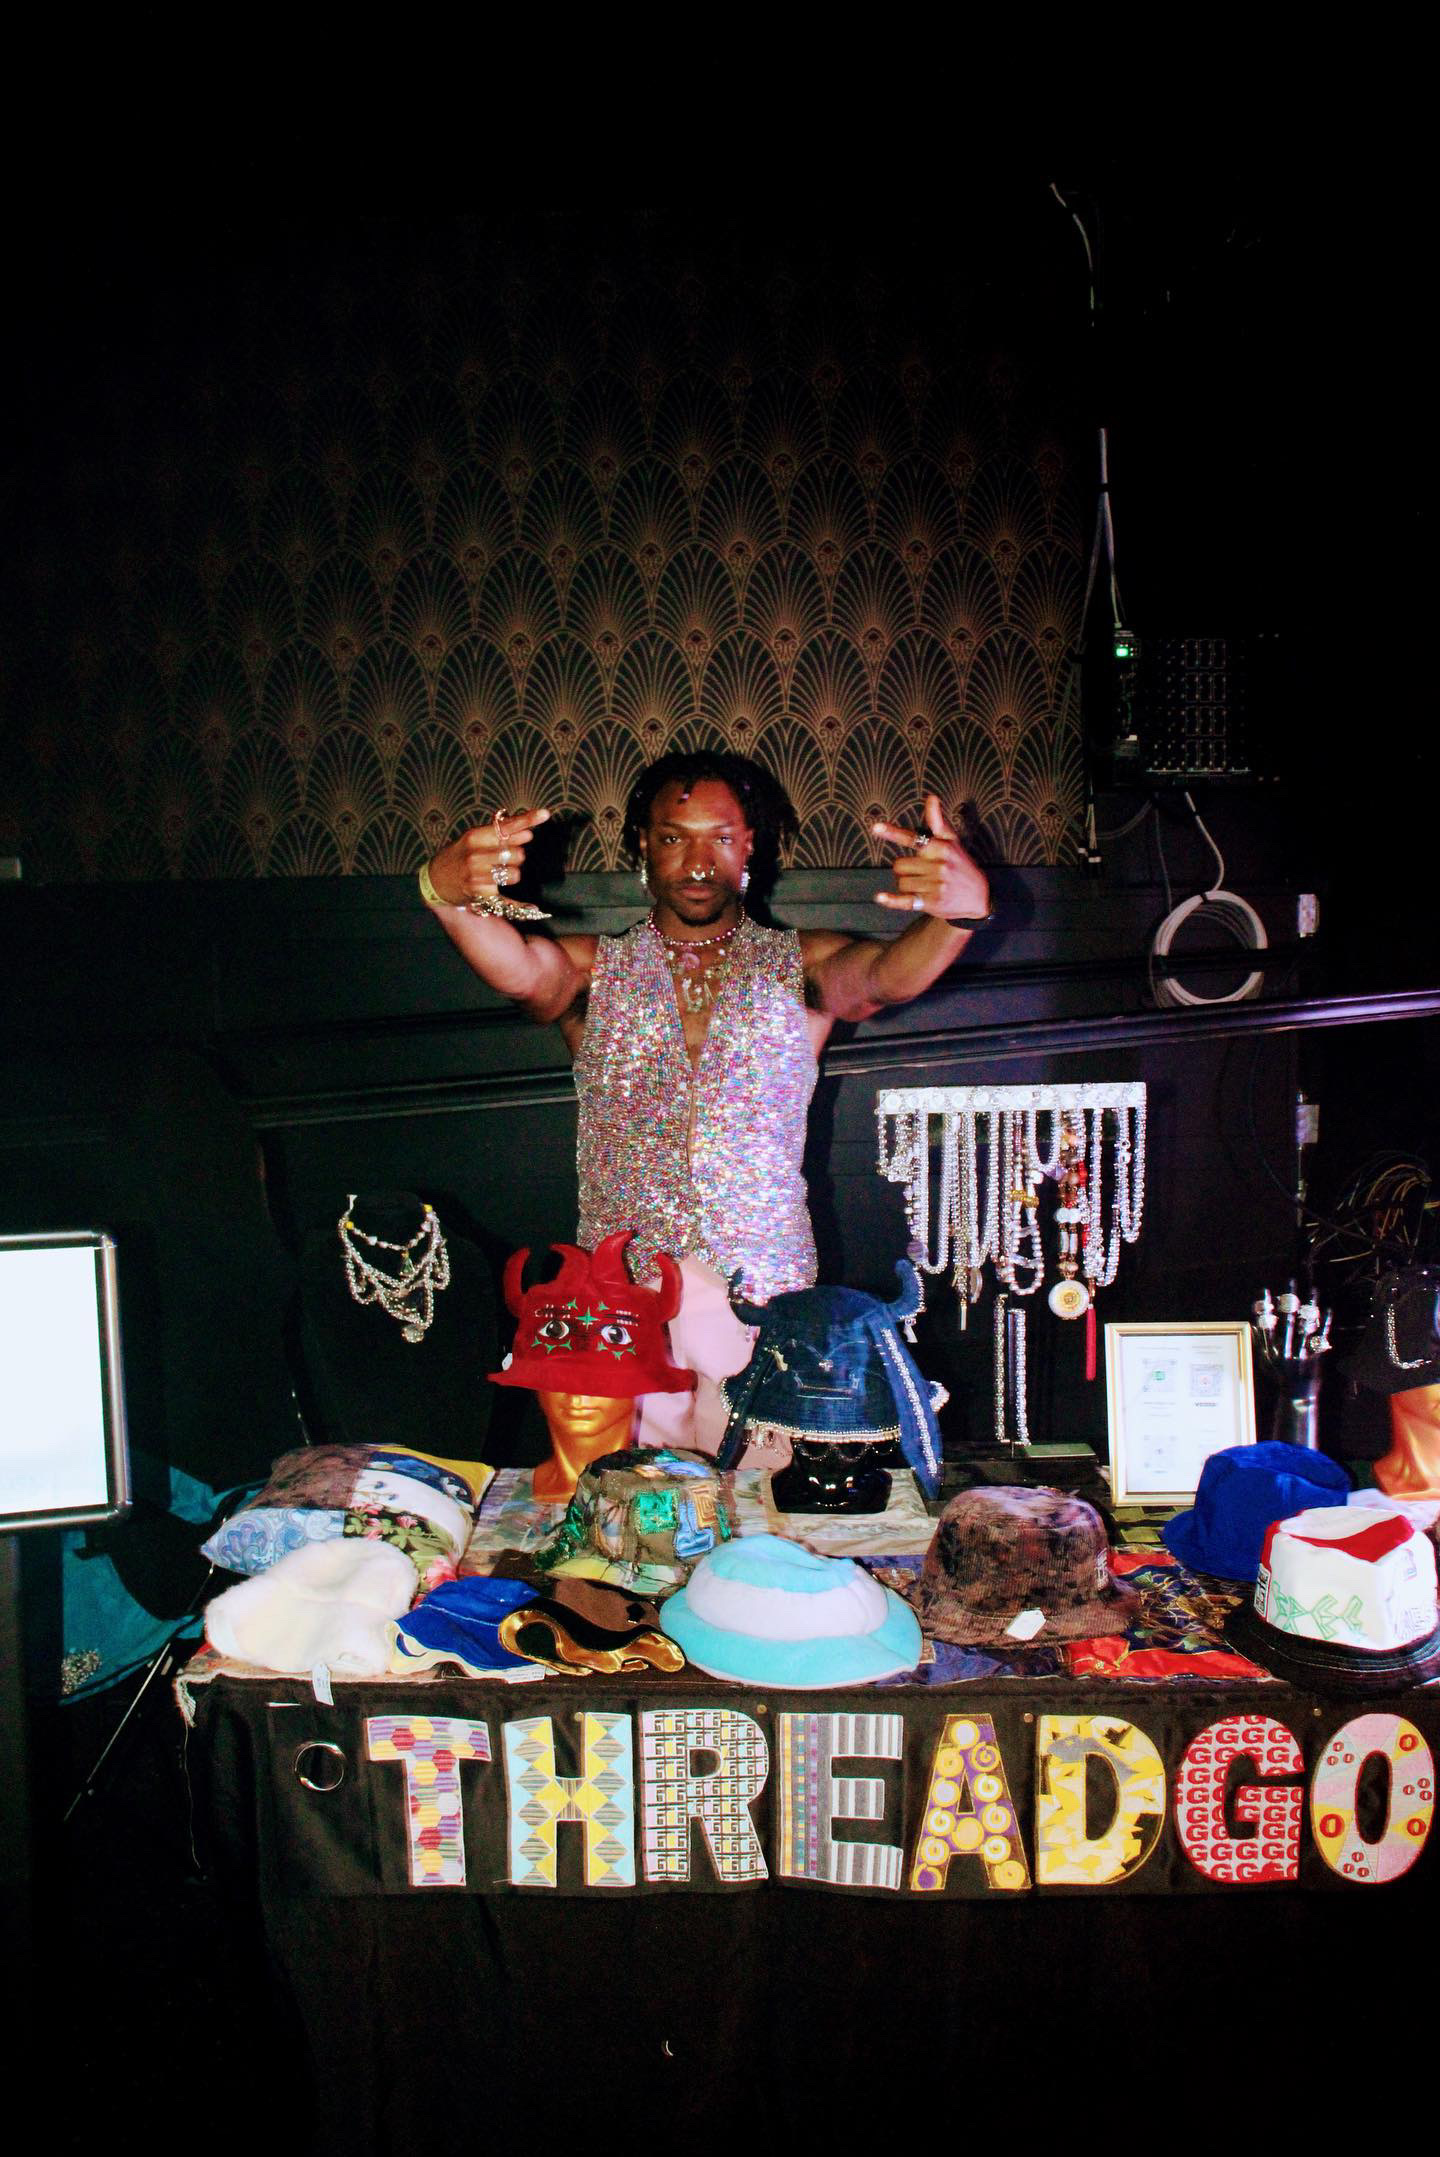 Abdul-Malik Ford standing behind the ThreadGoldz booth at the Sho-Nuff Parties Retro Rewind event